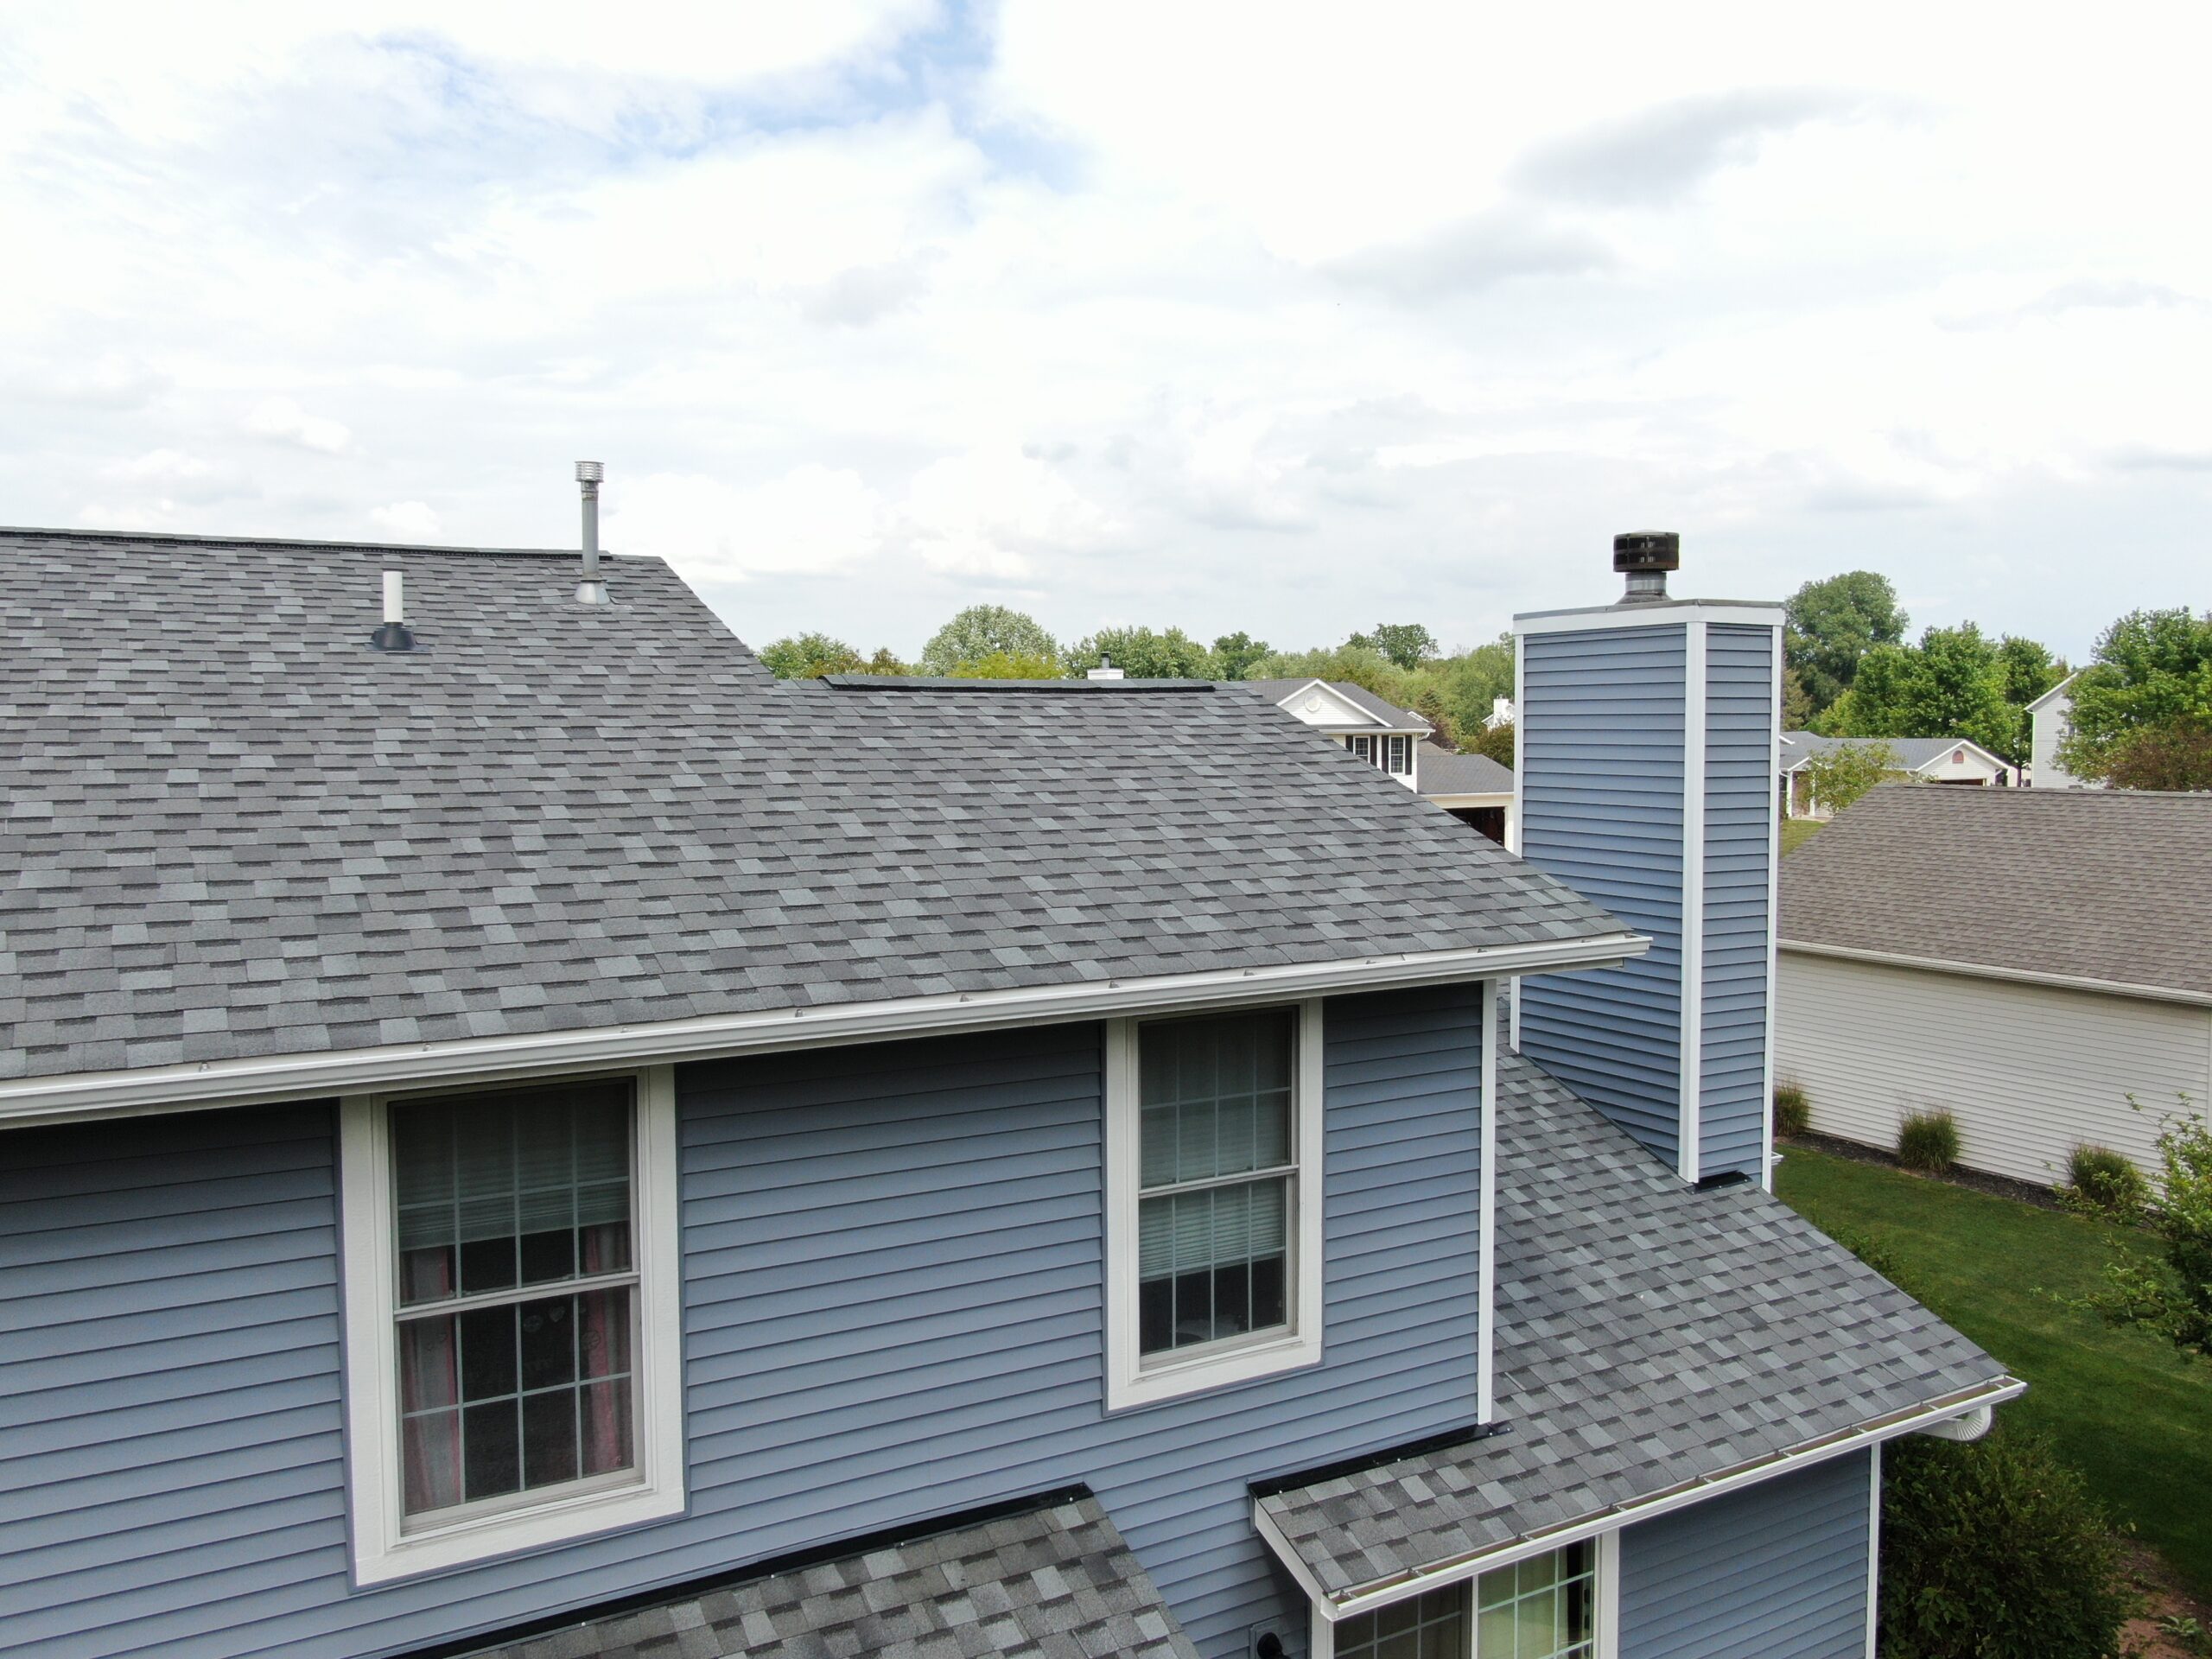 Newly installed dusty blue Norandex siding on a Wisconsin home.